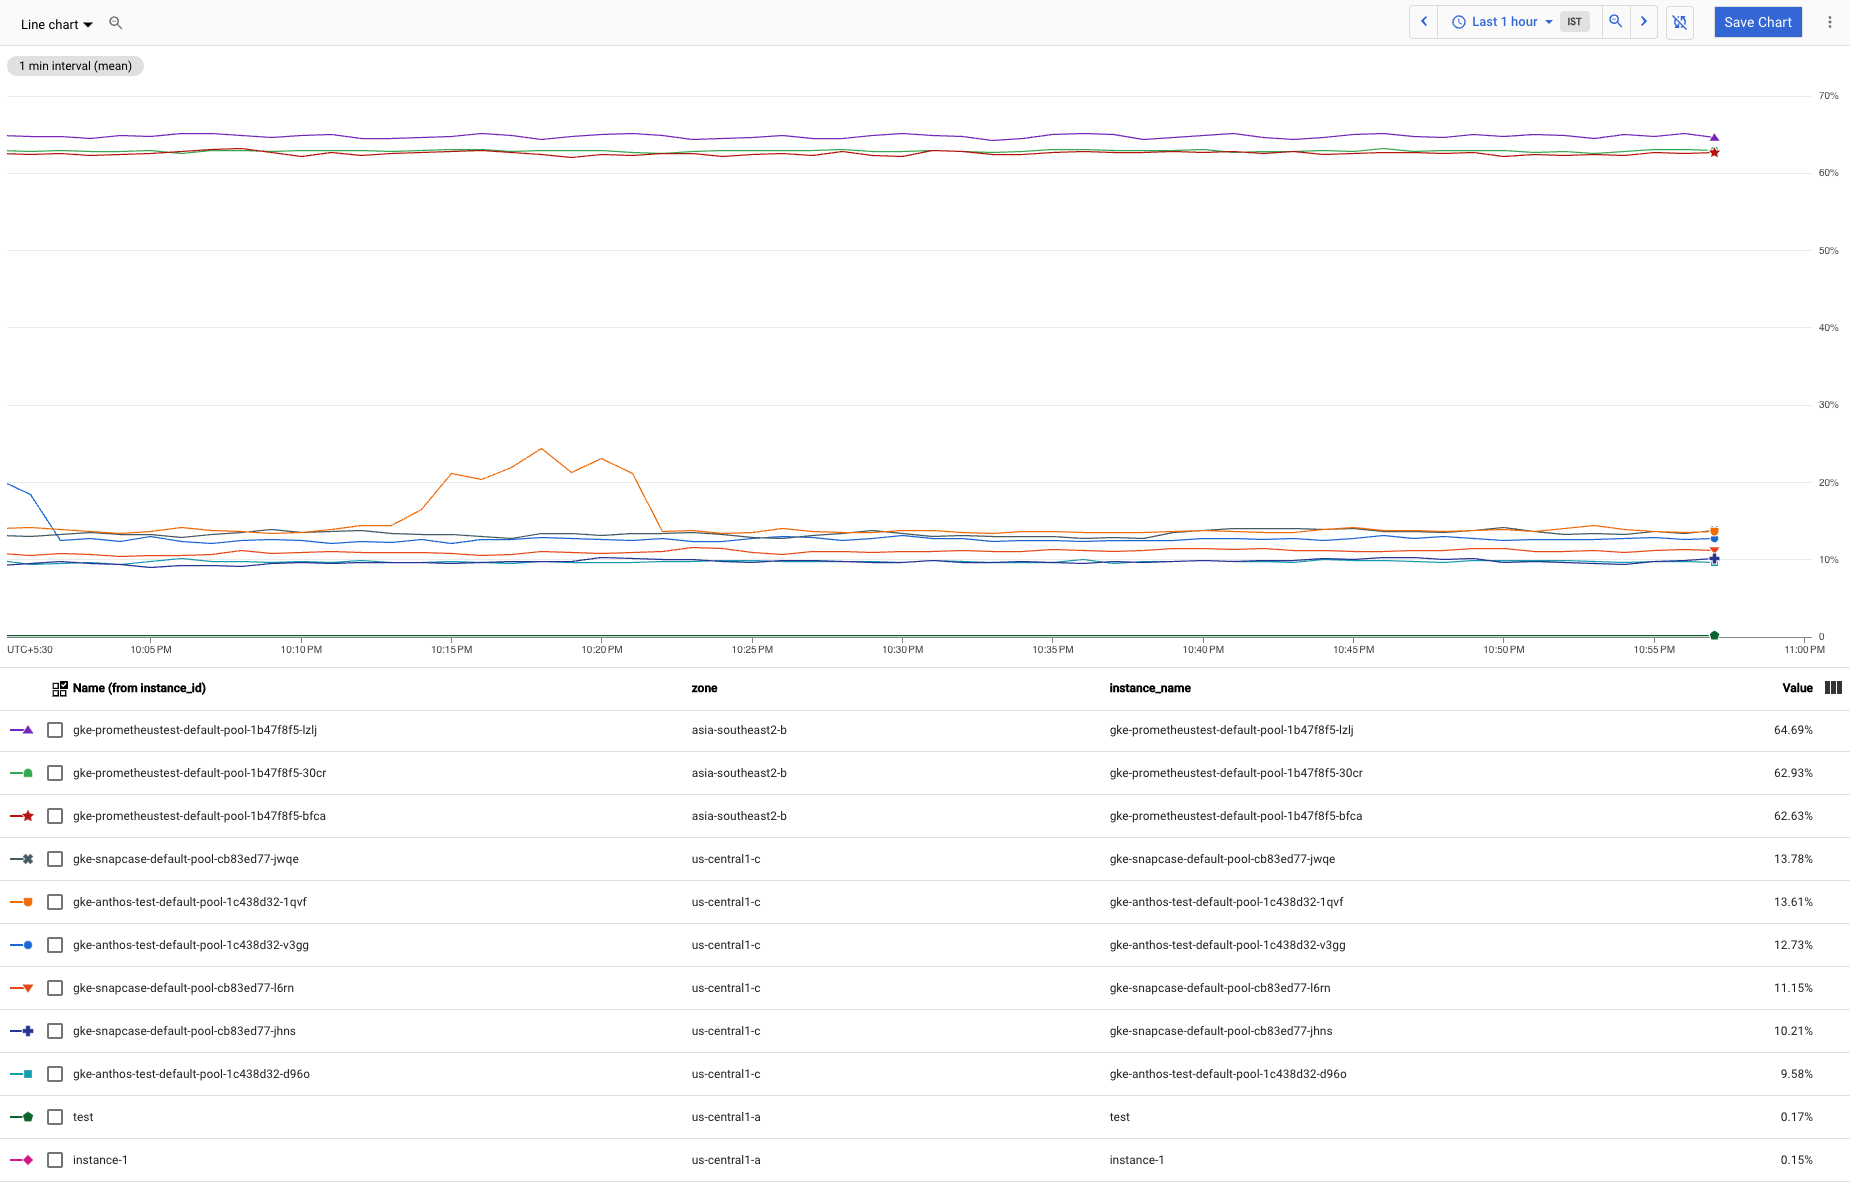 Chart shows many CPU utilization lines, with several outliers.